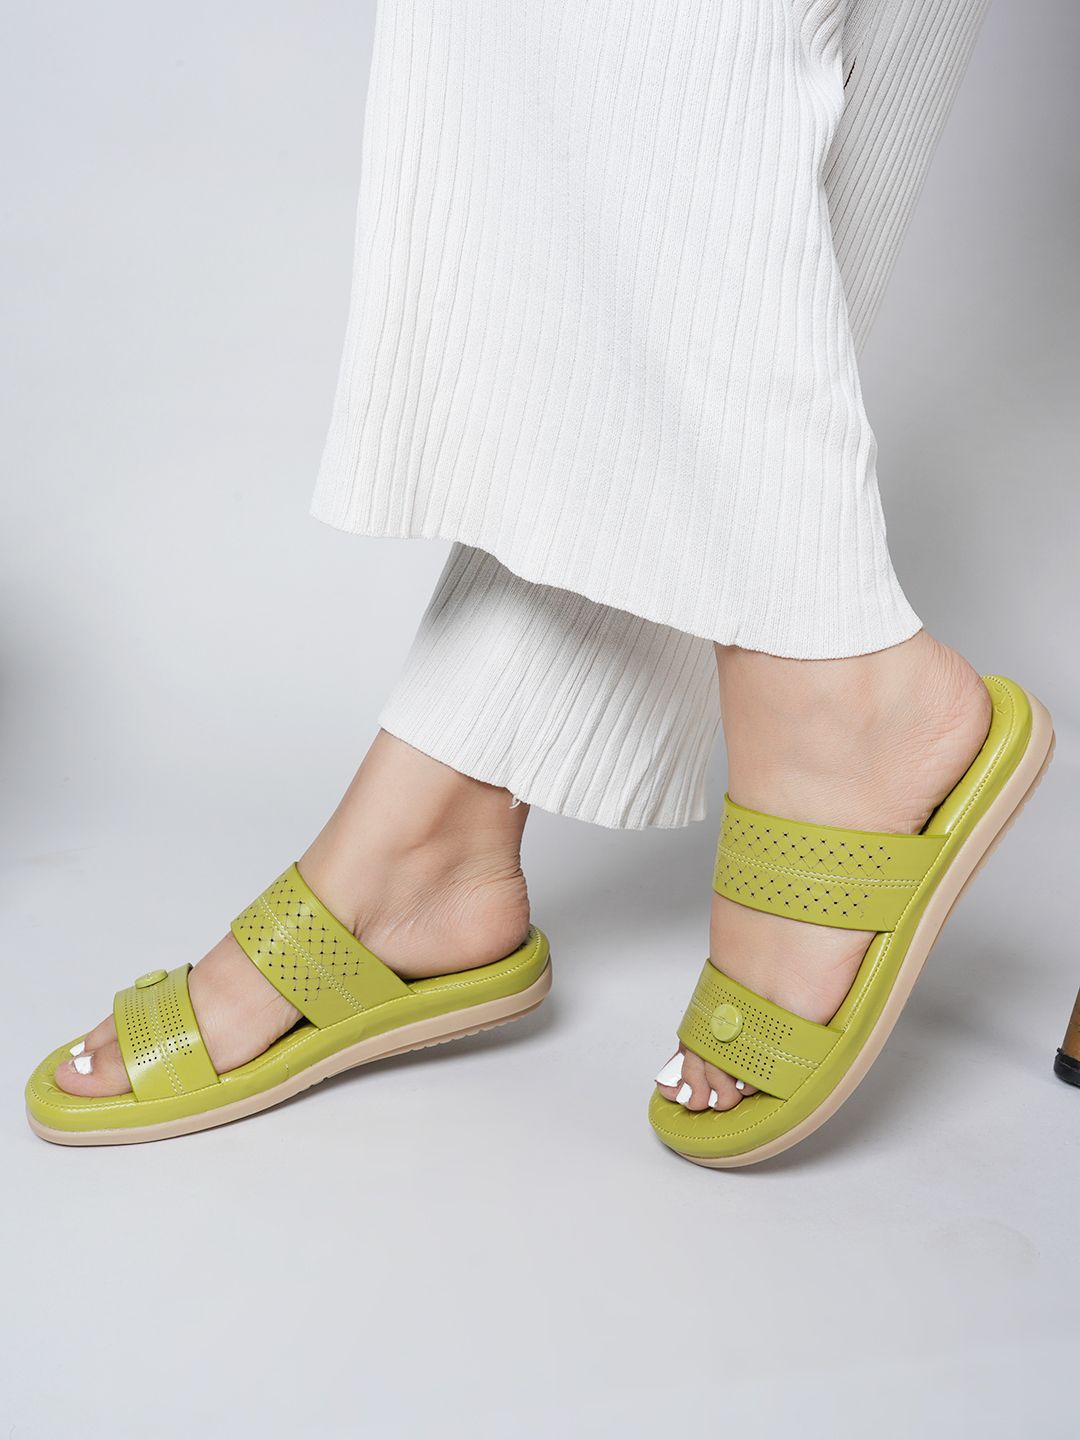 Mast & Harbour Green Perforated Open Toe Flats Price in India